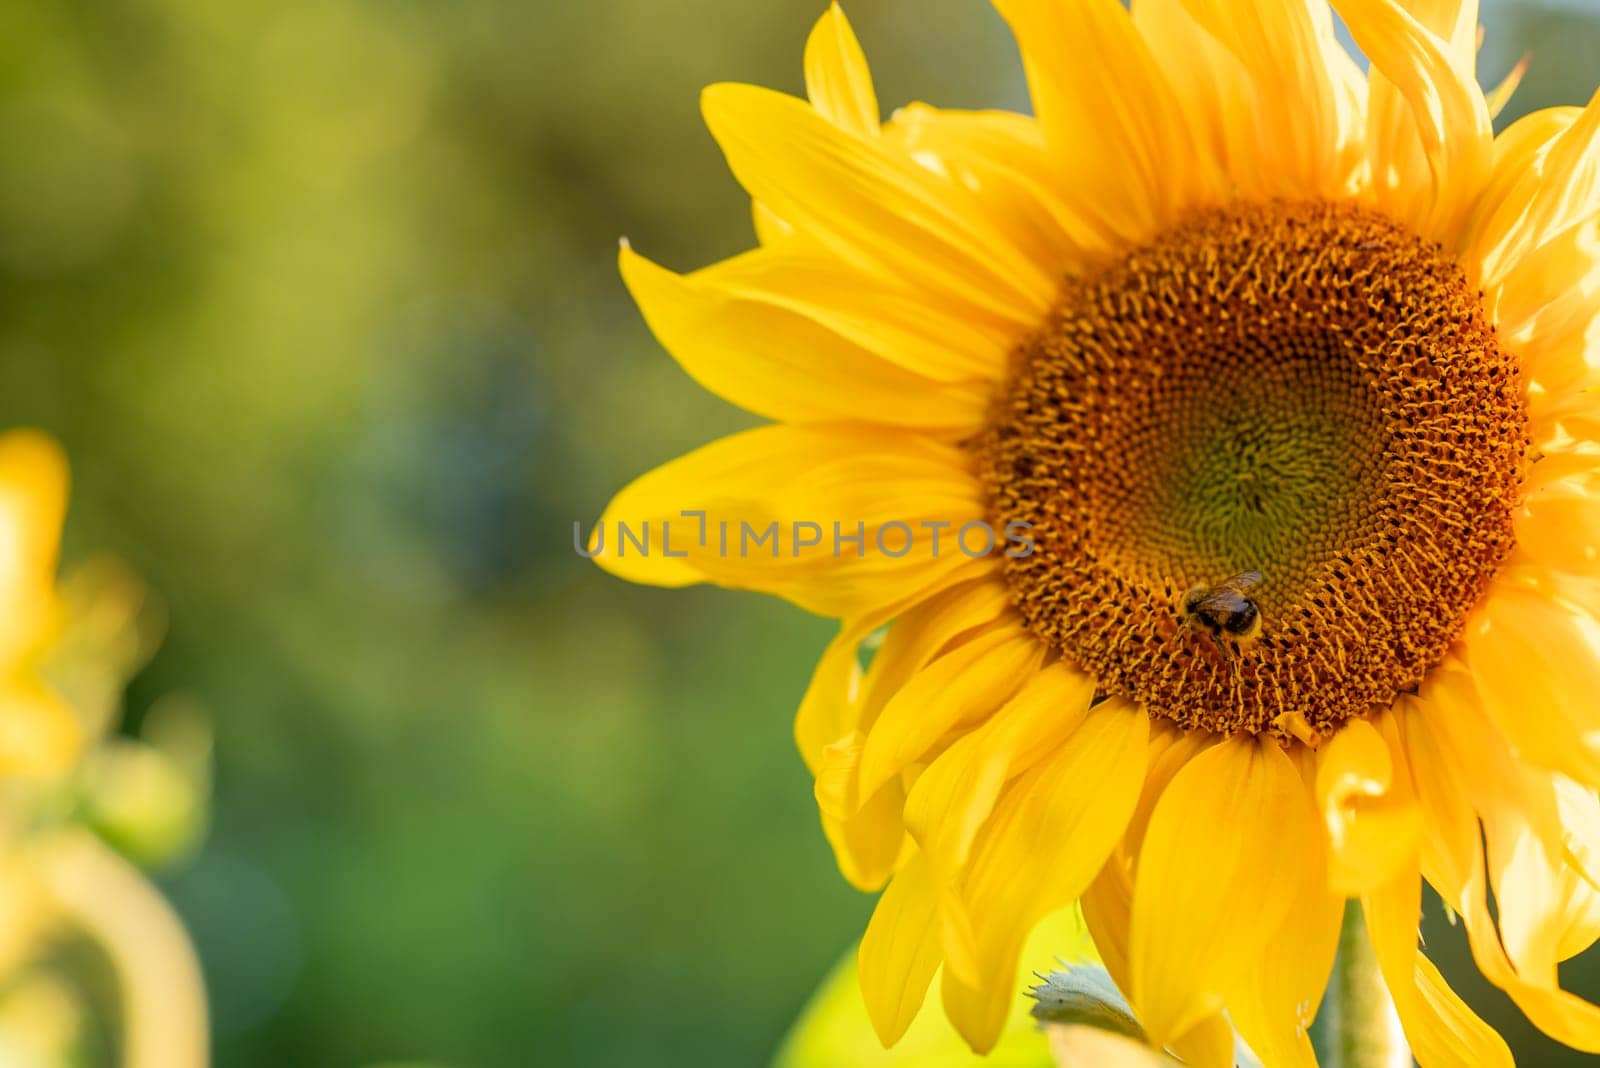 Sunflower during a nice sunny summer day outdoors